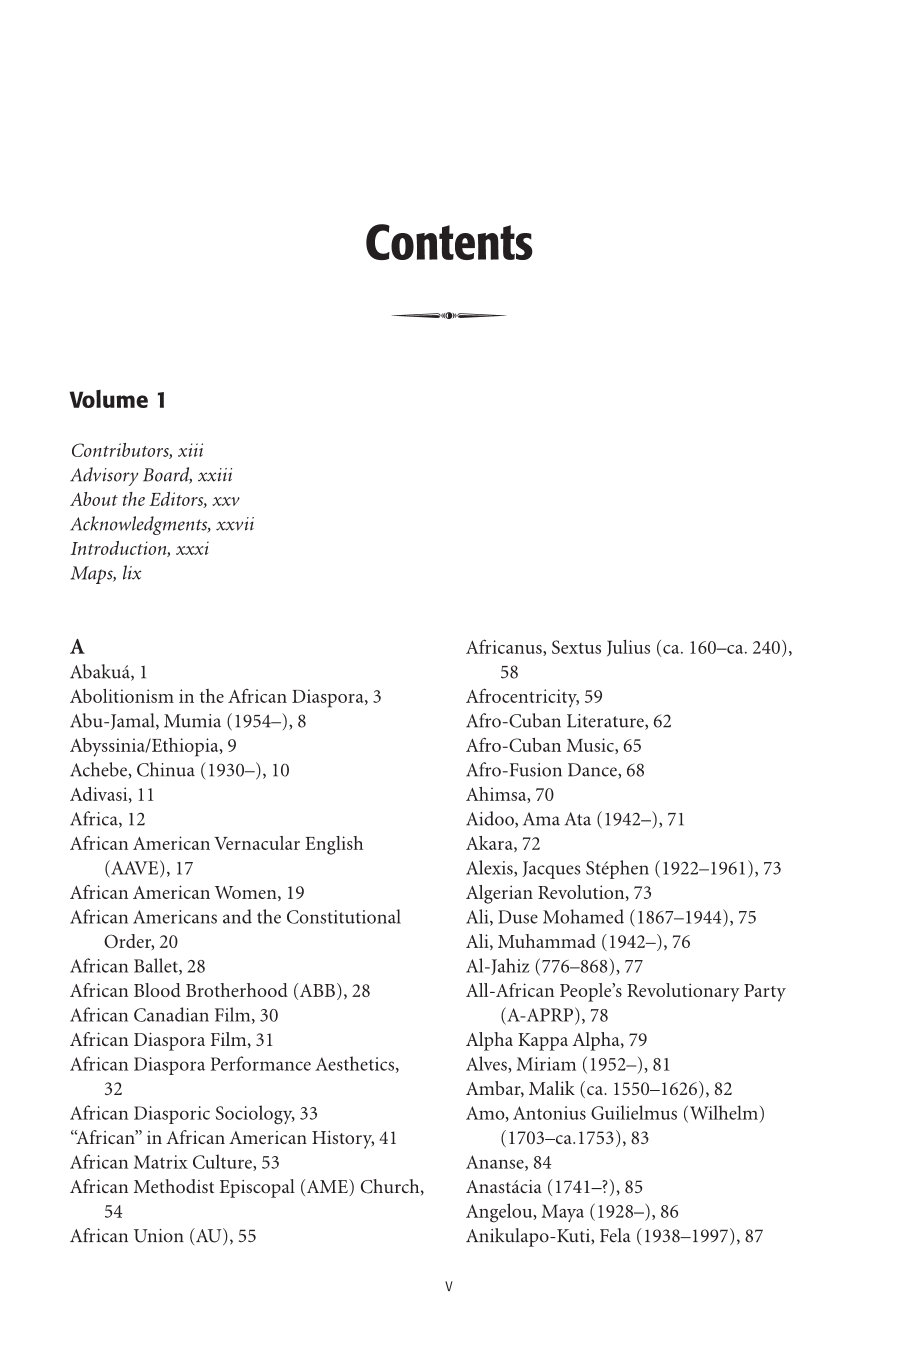 Encyclopedia of the African Diaspora: Origins, Experiences, and Culture [3 volumes] page Vol1:v